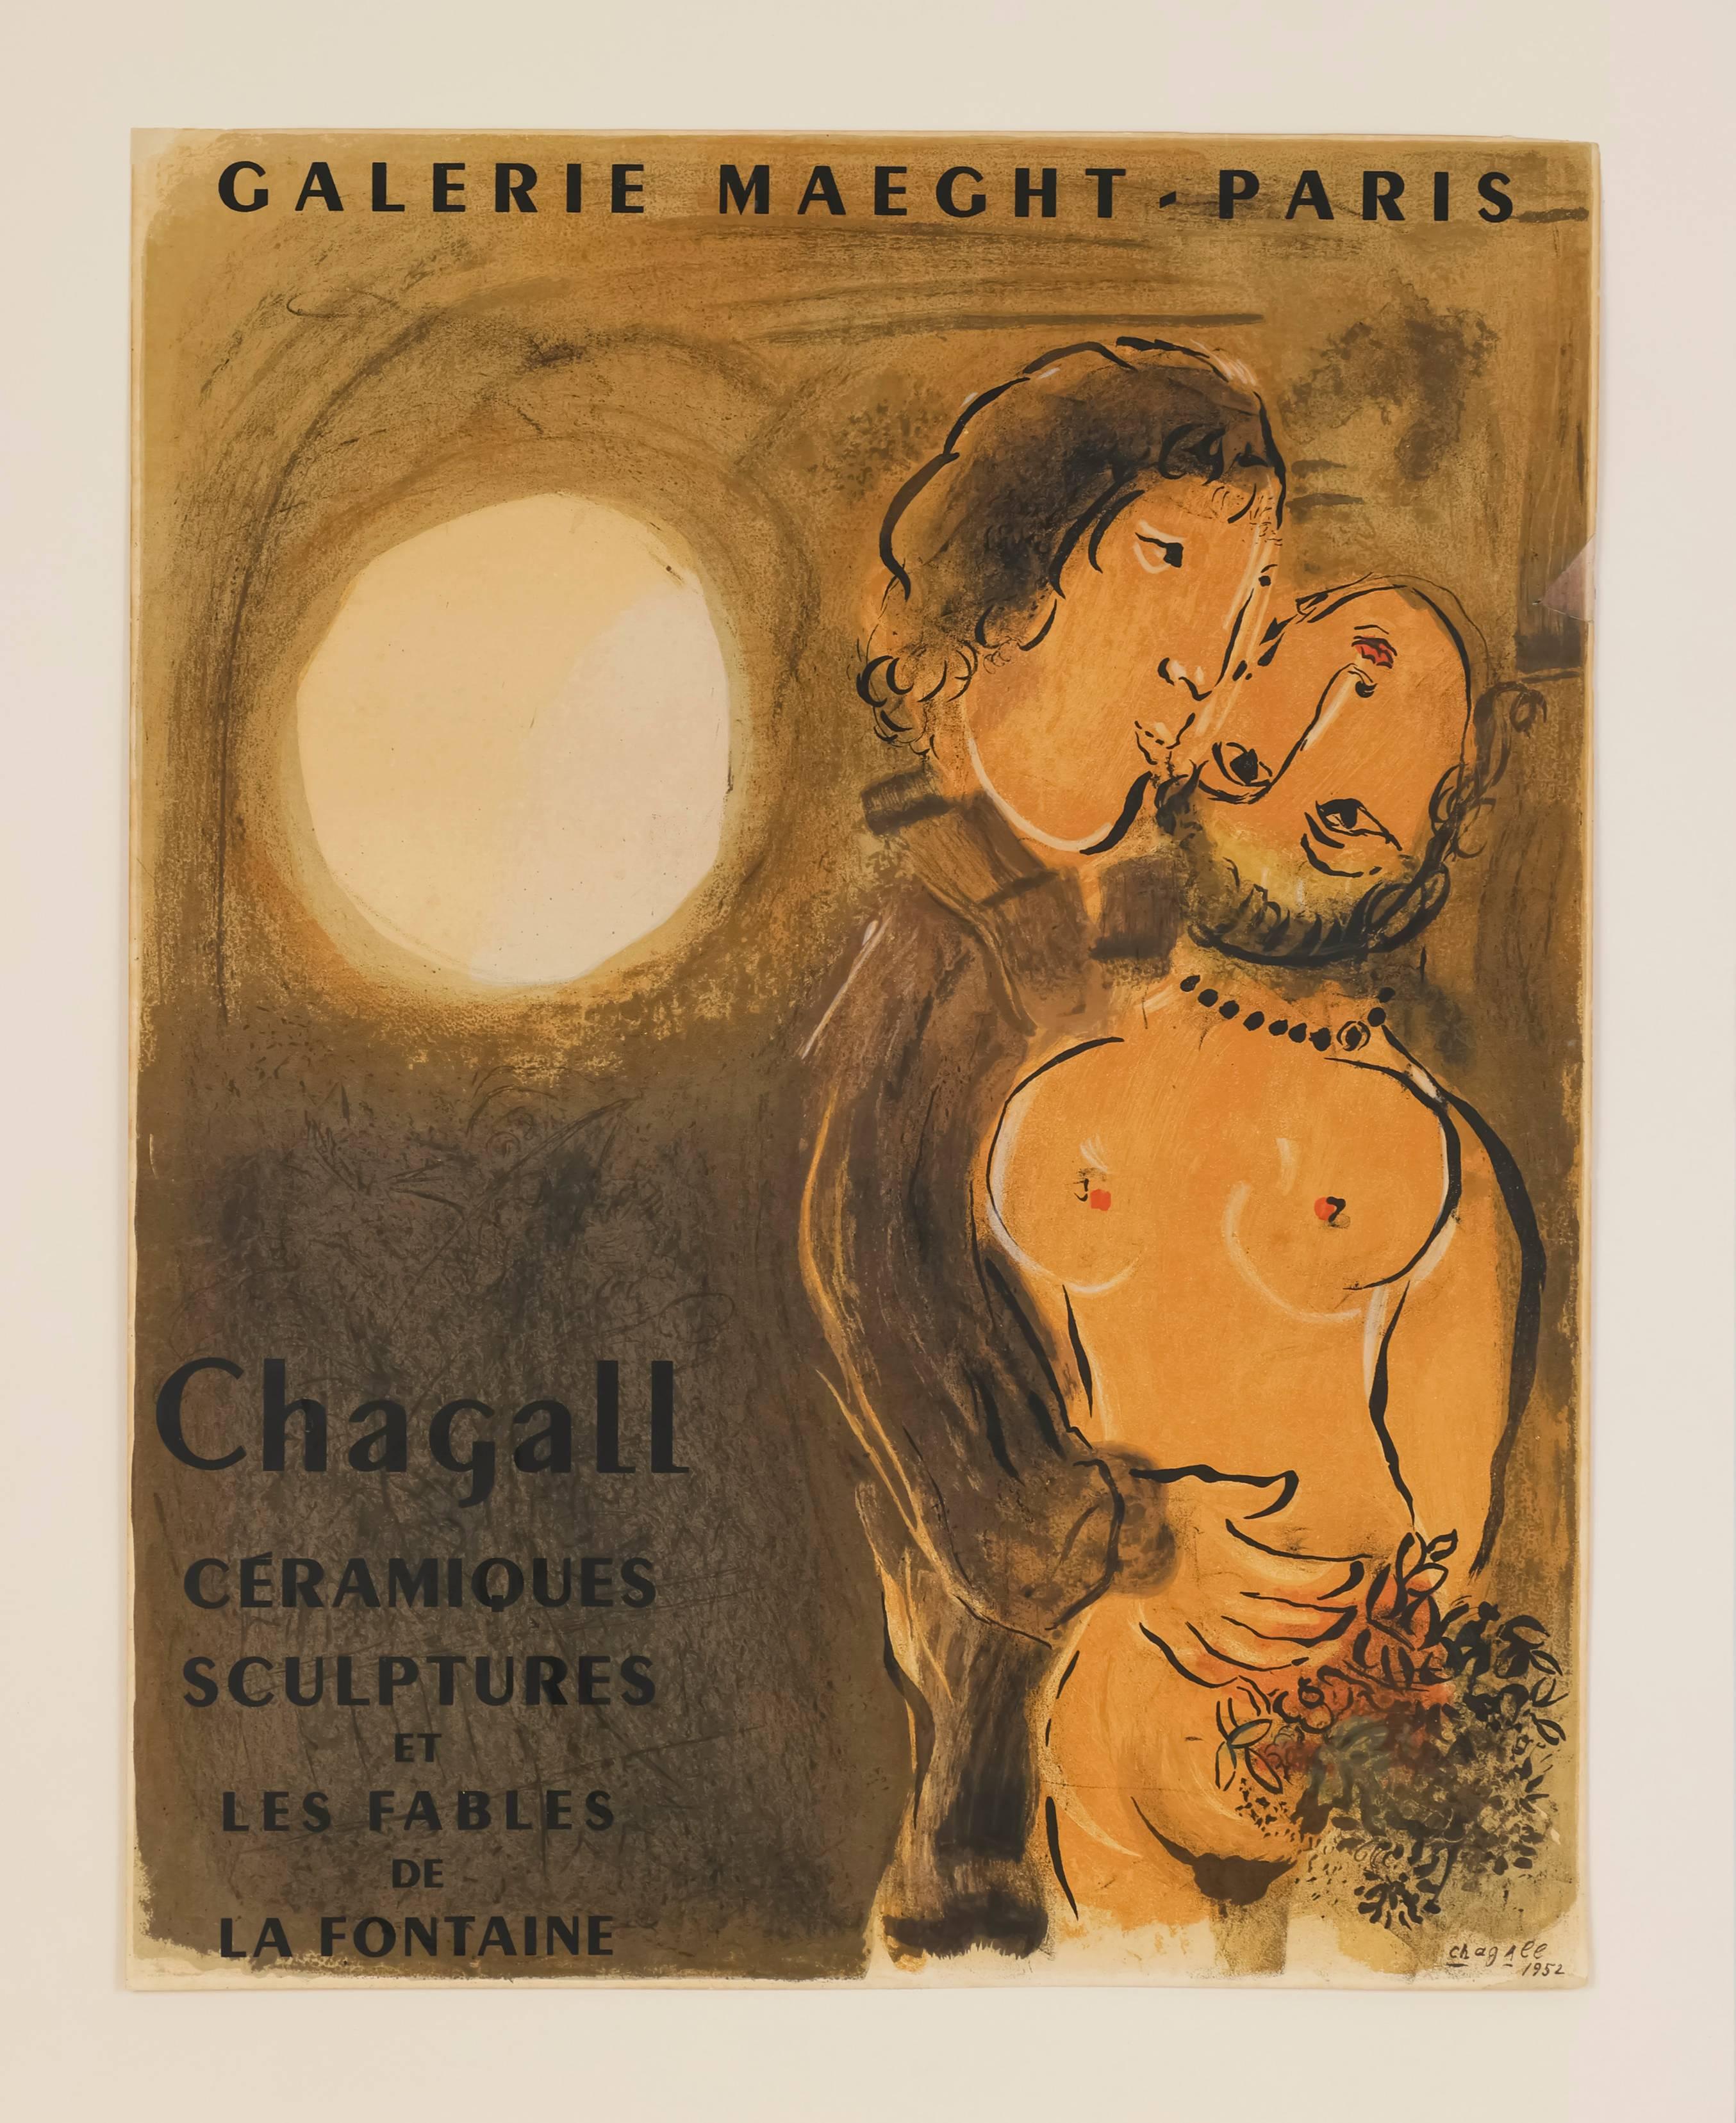 Marc Chagall Figurative Print - Galerie Maeght ( Couple en Ocre ) 1952 Lithograph Poster